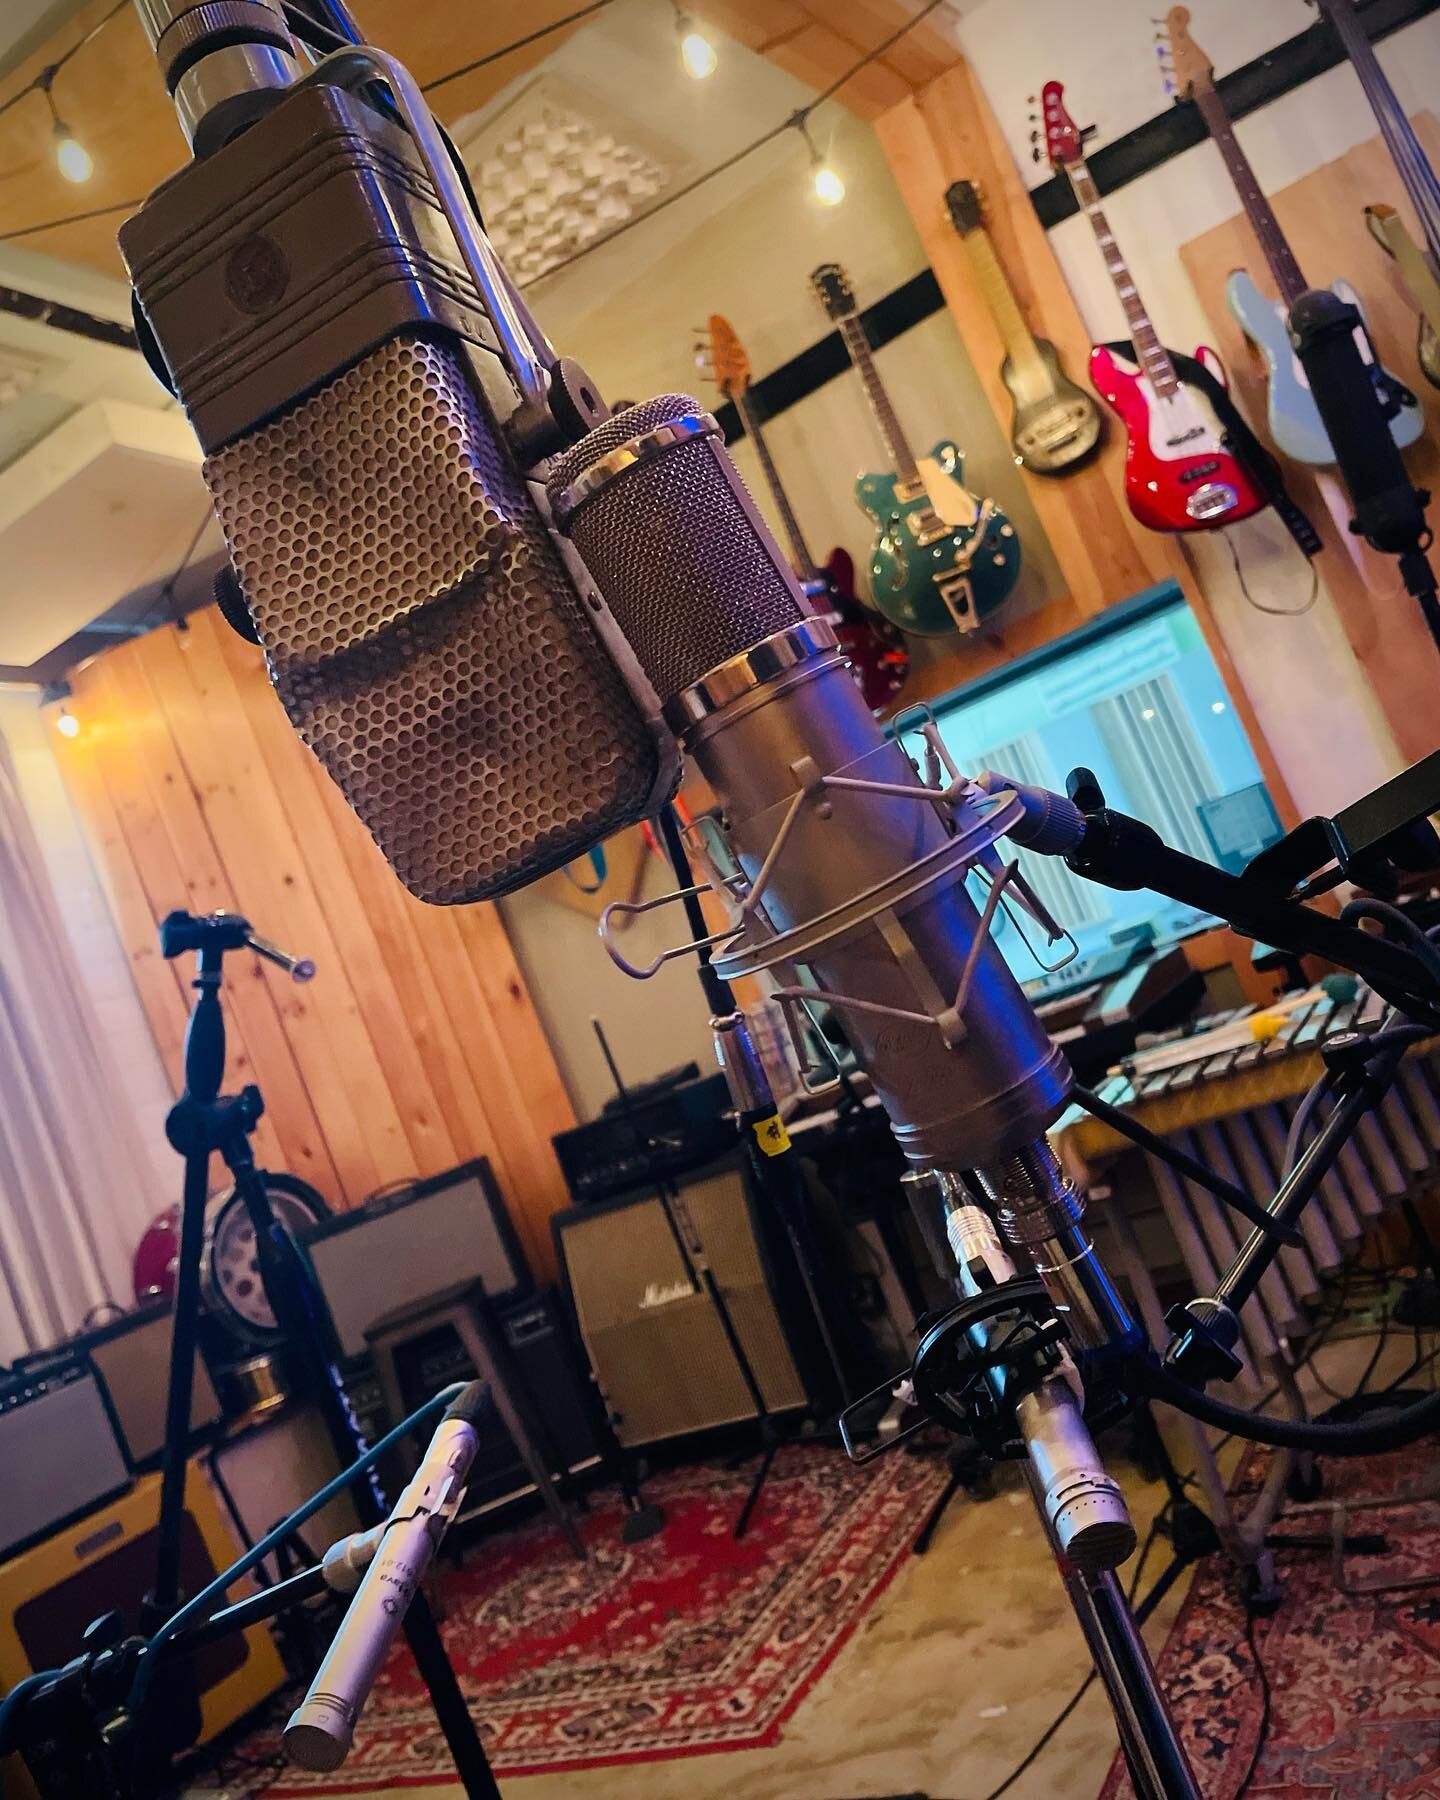 My office away from my office this week...The CREAMERY STUDIO in Brooklyn.

&quot;FRANKIE&quot; was used while recording simultaneous guitar and croonings.